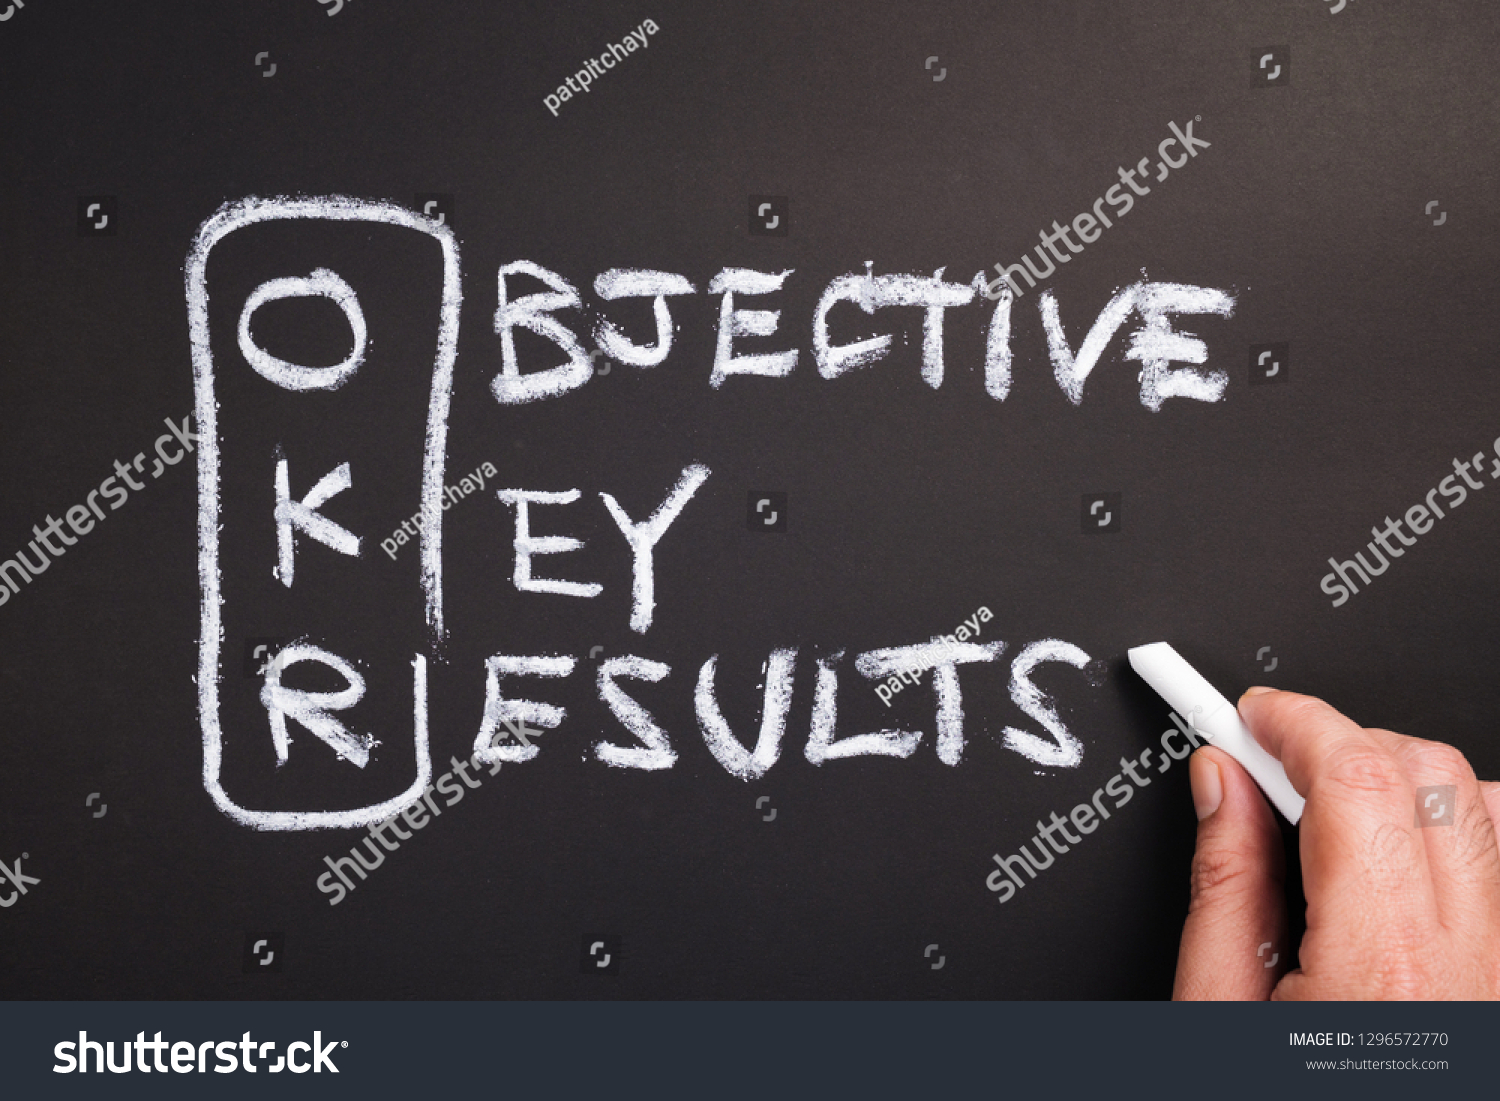 Hand writing text and acronym of OKR (Objective Key Results) on chalkboard #1296572770